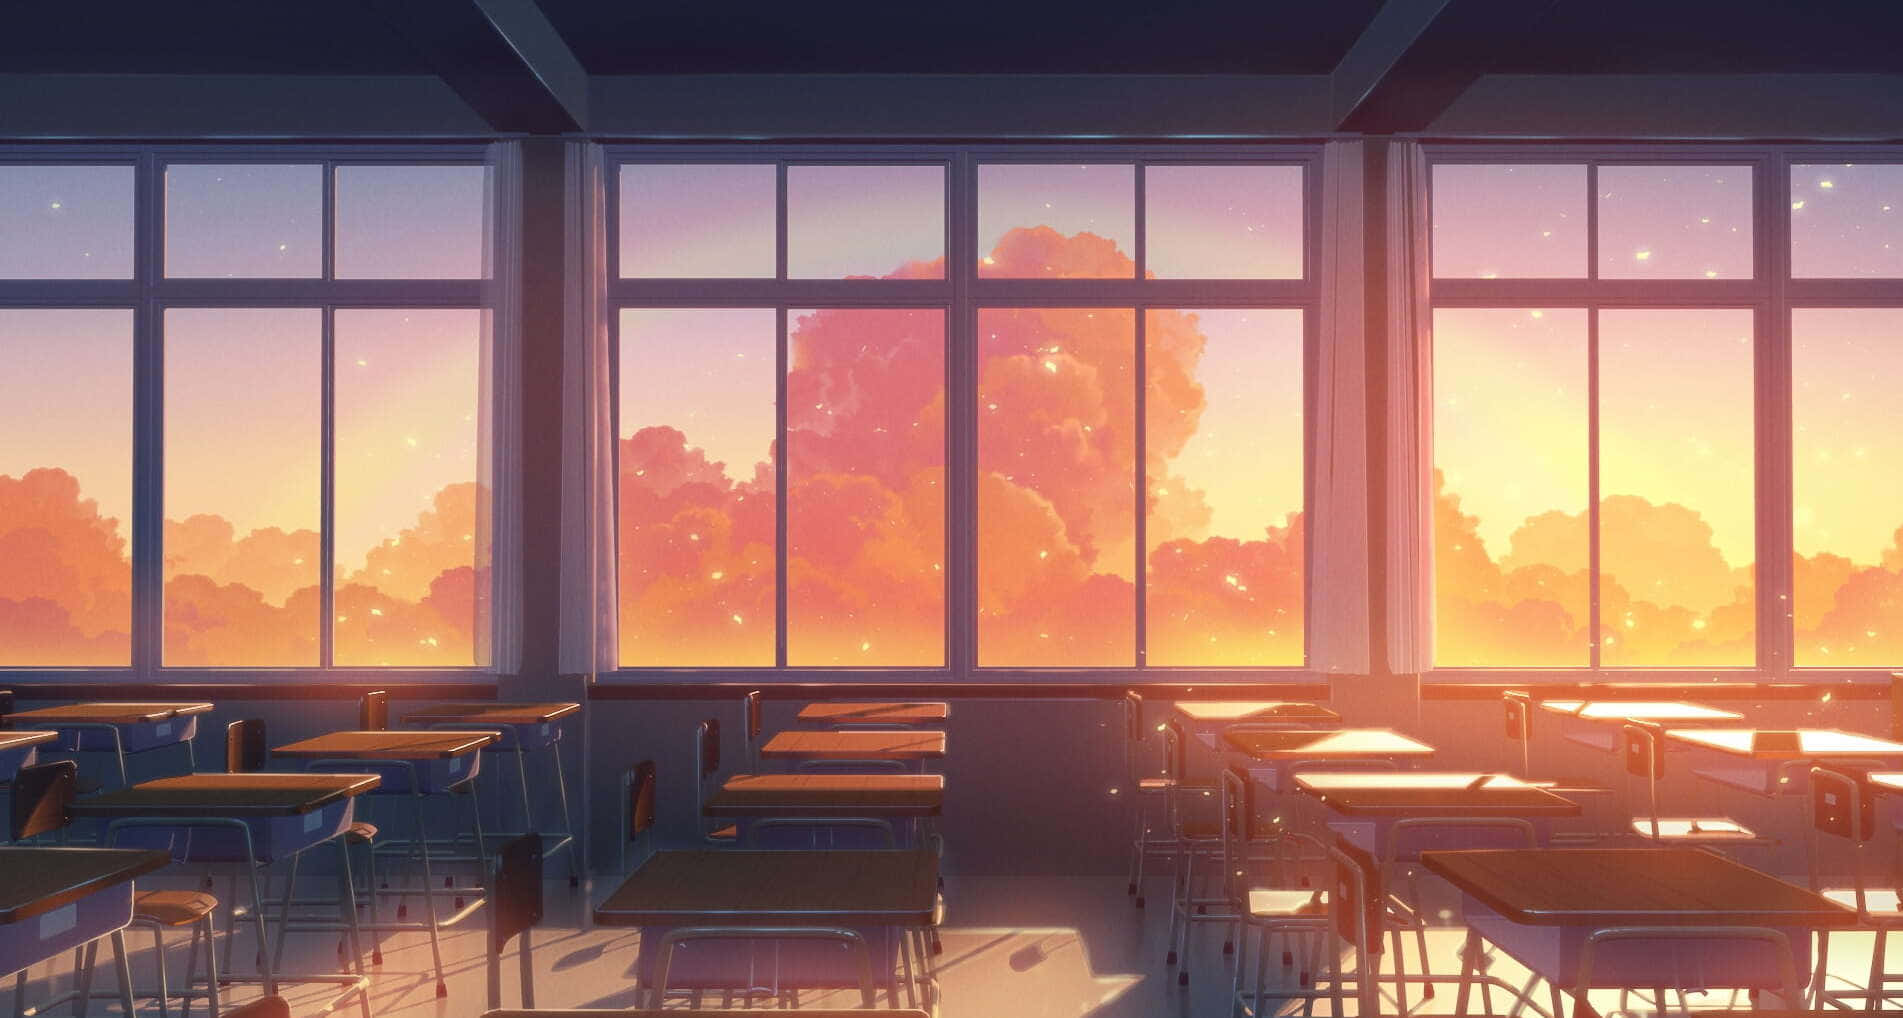 A Classroom With Windows And A Sunset